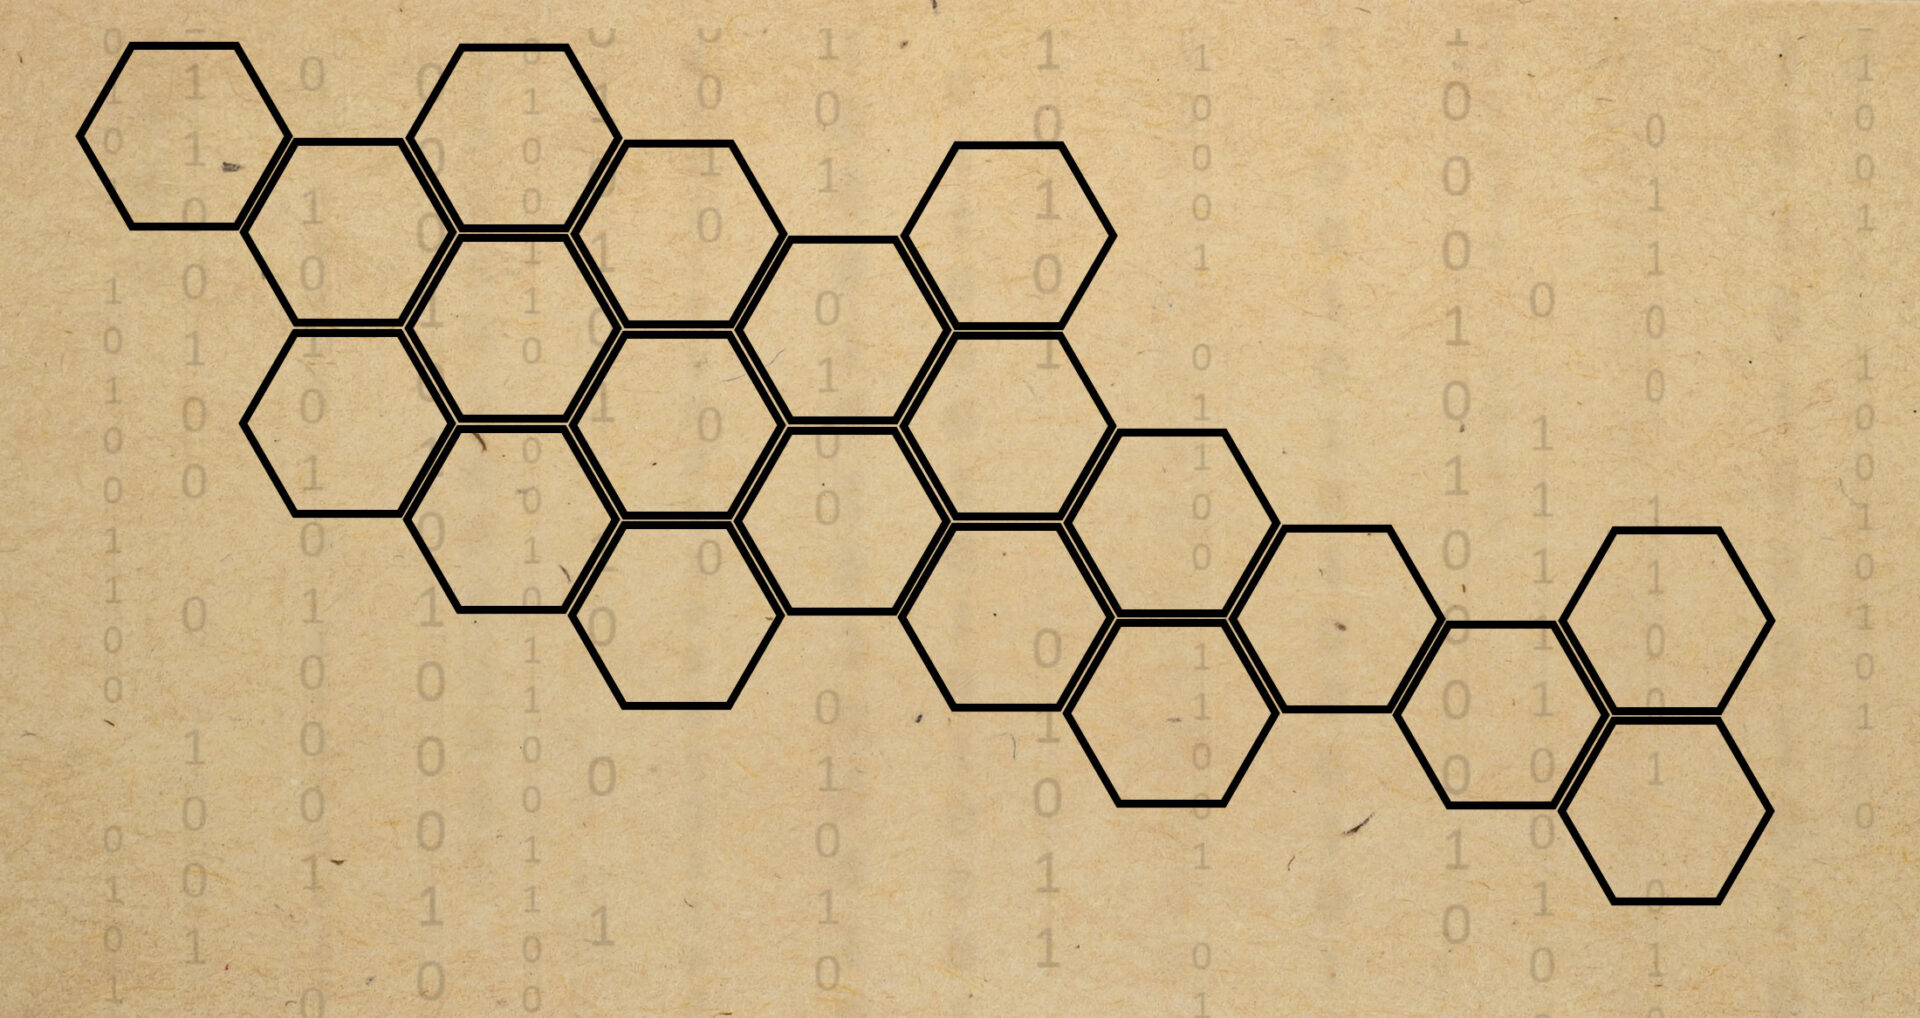 Hexagons over a background of binary digits.